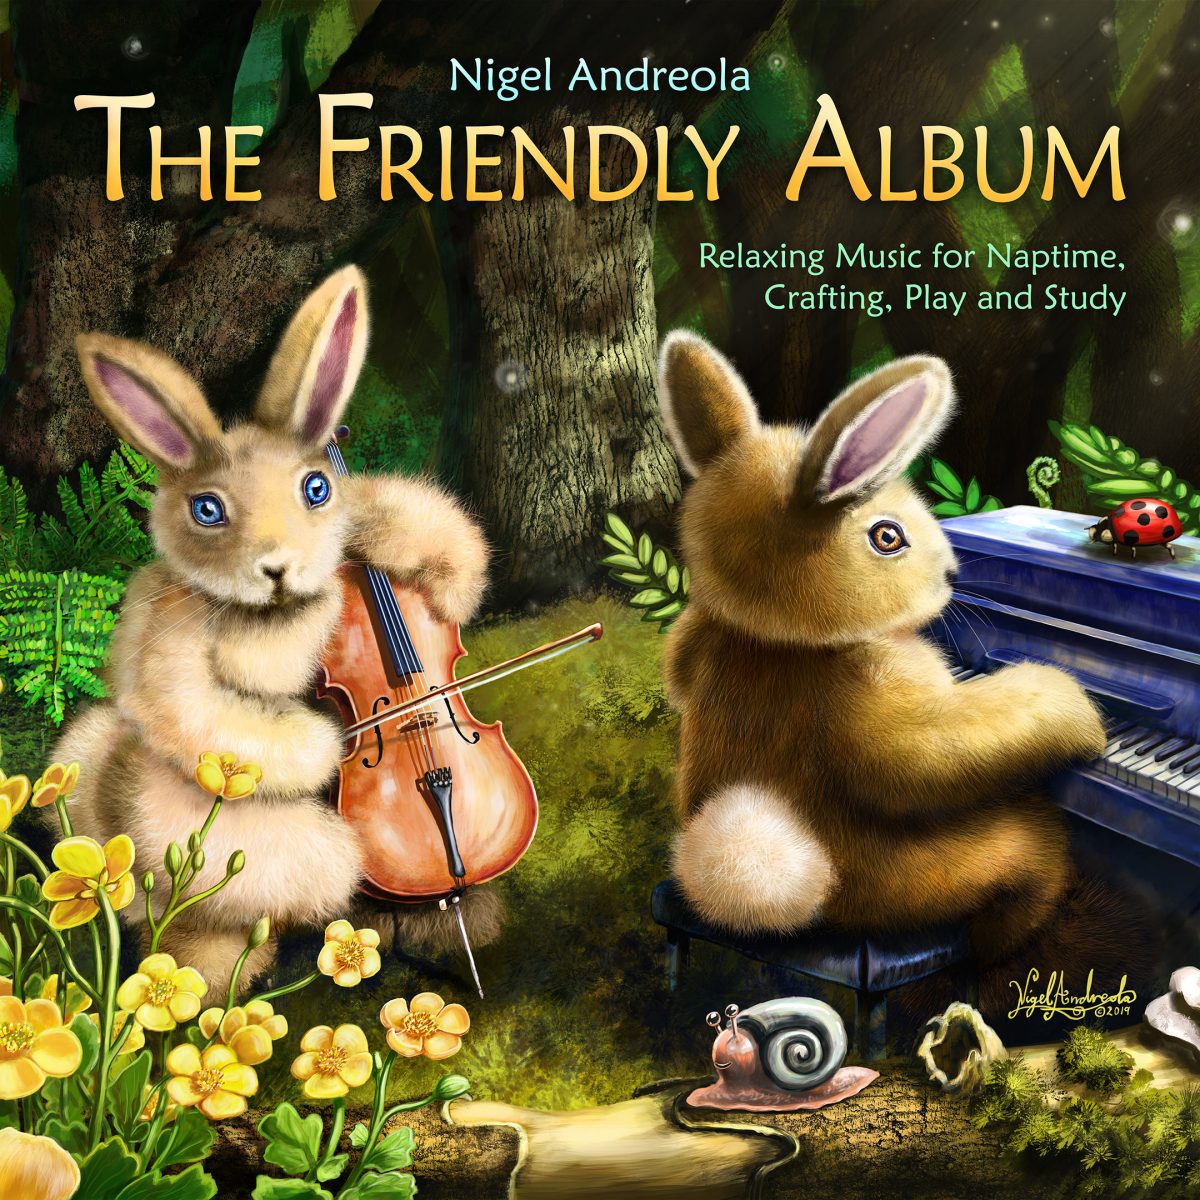 The Friendly Album by Nigel Andreola